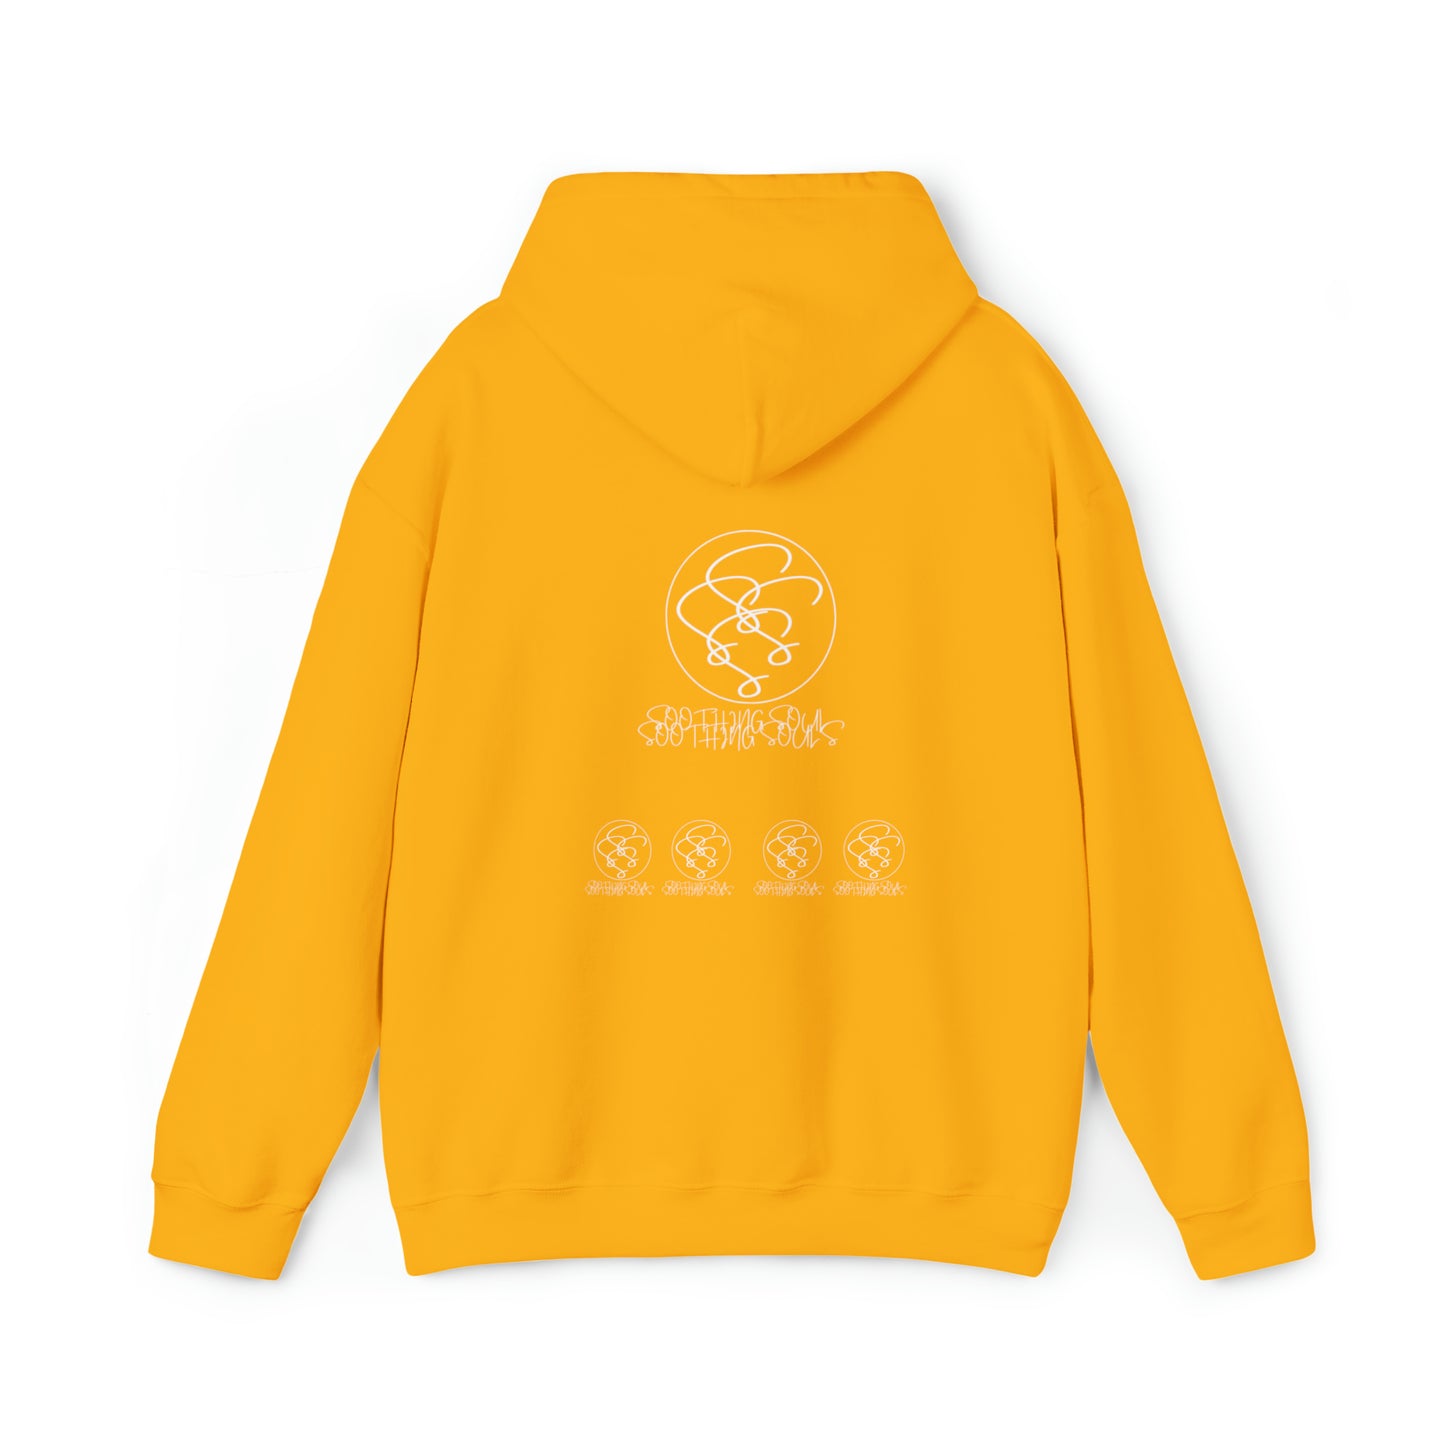 SSSS Positive Vibes & Cheesey Smiles Unisex Heavy Blend™ Hooded Sweatshirt